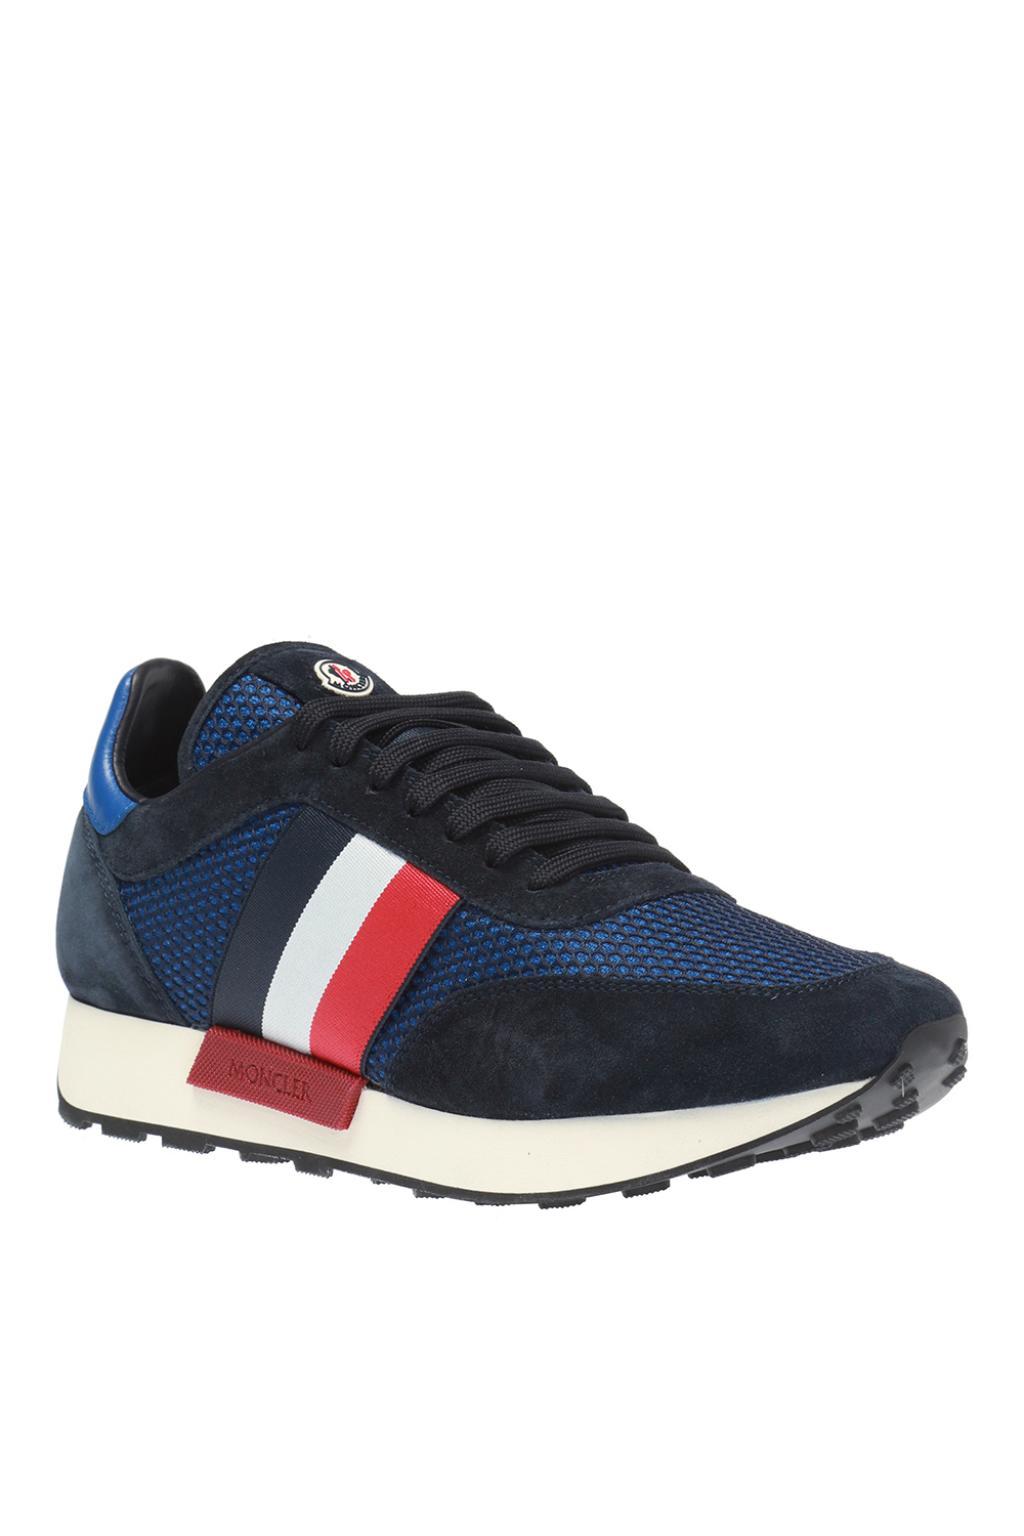 Moncler Suede 'horace' Sneakers in White Navy Blue (Blue) for Men - Lyst